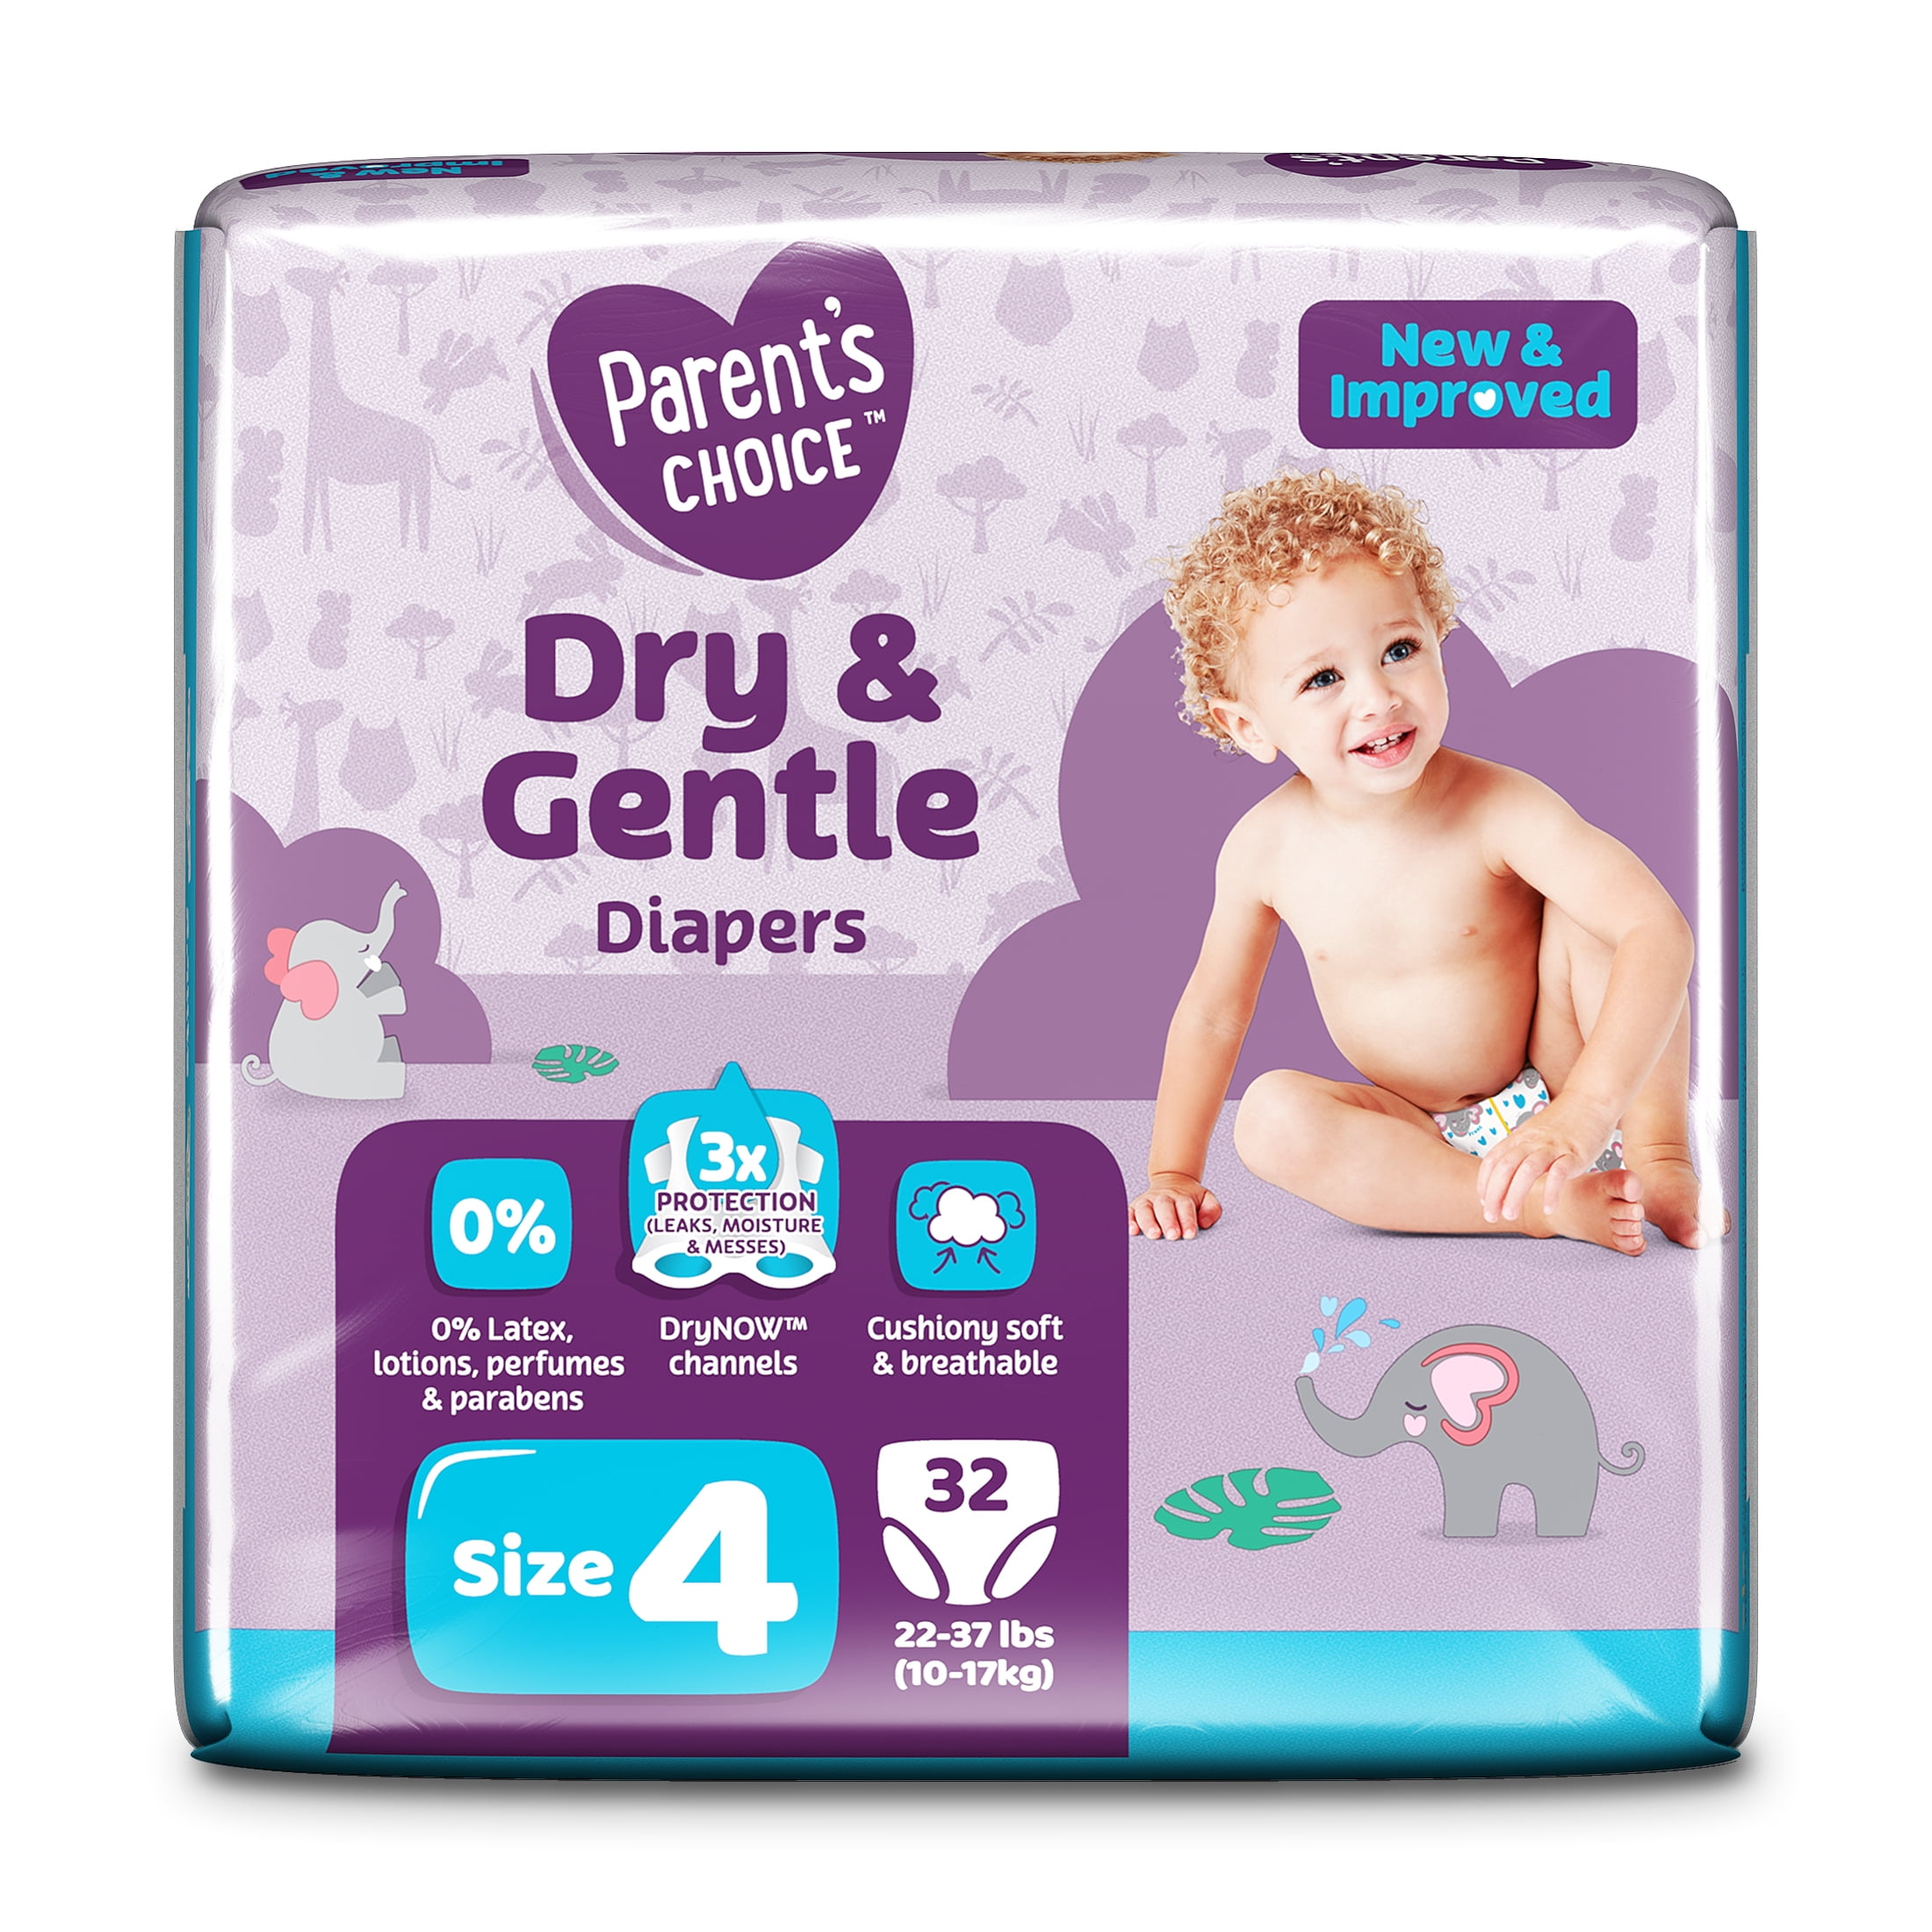 Parent's Choice Dry & Gentle Diapers Size 7, 120 Count (Select for More  Options) - Yahoo Shopping